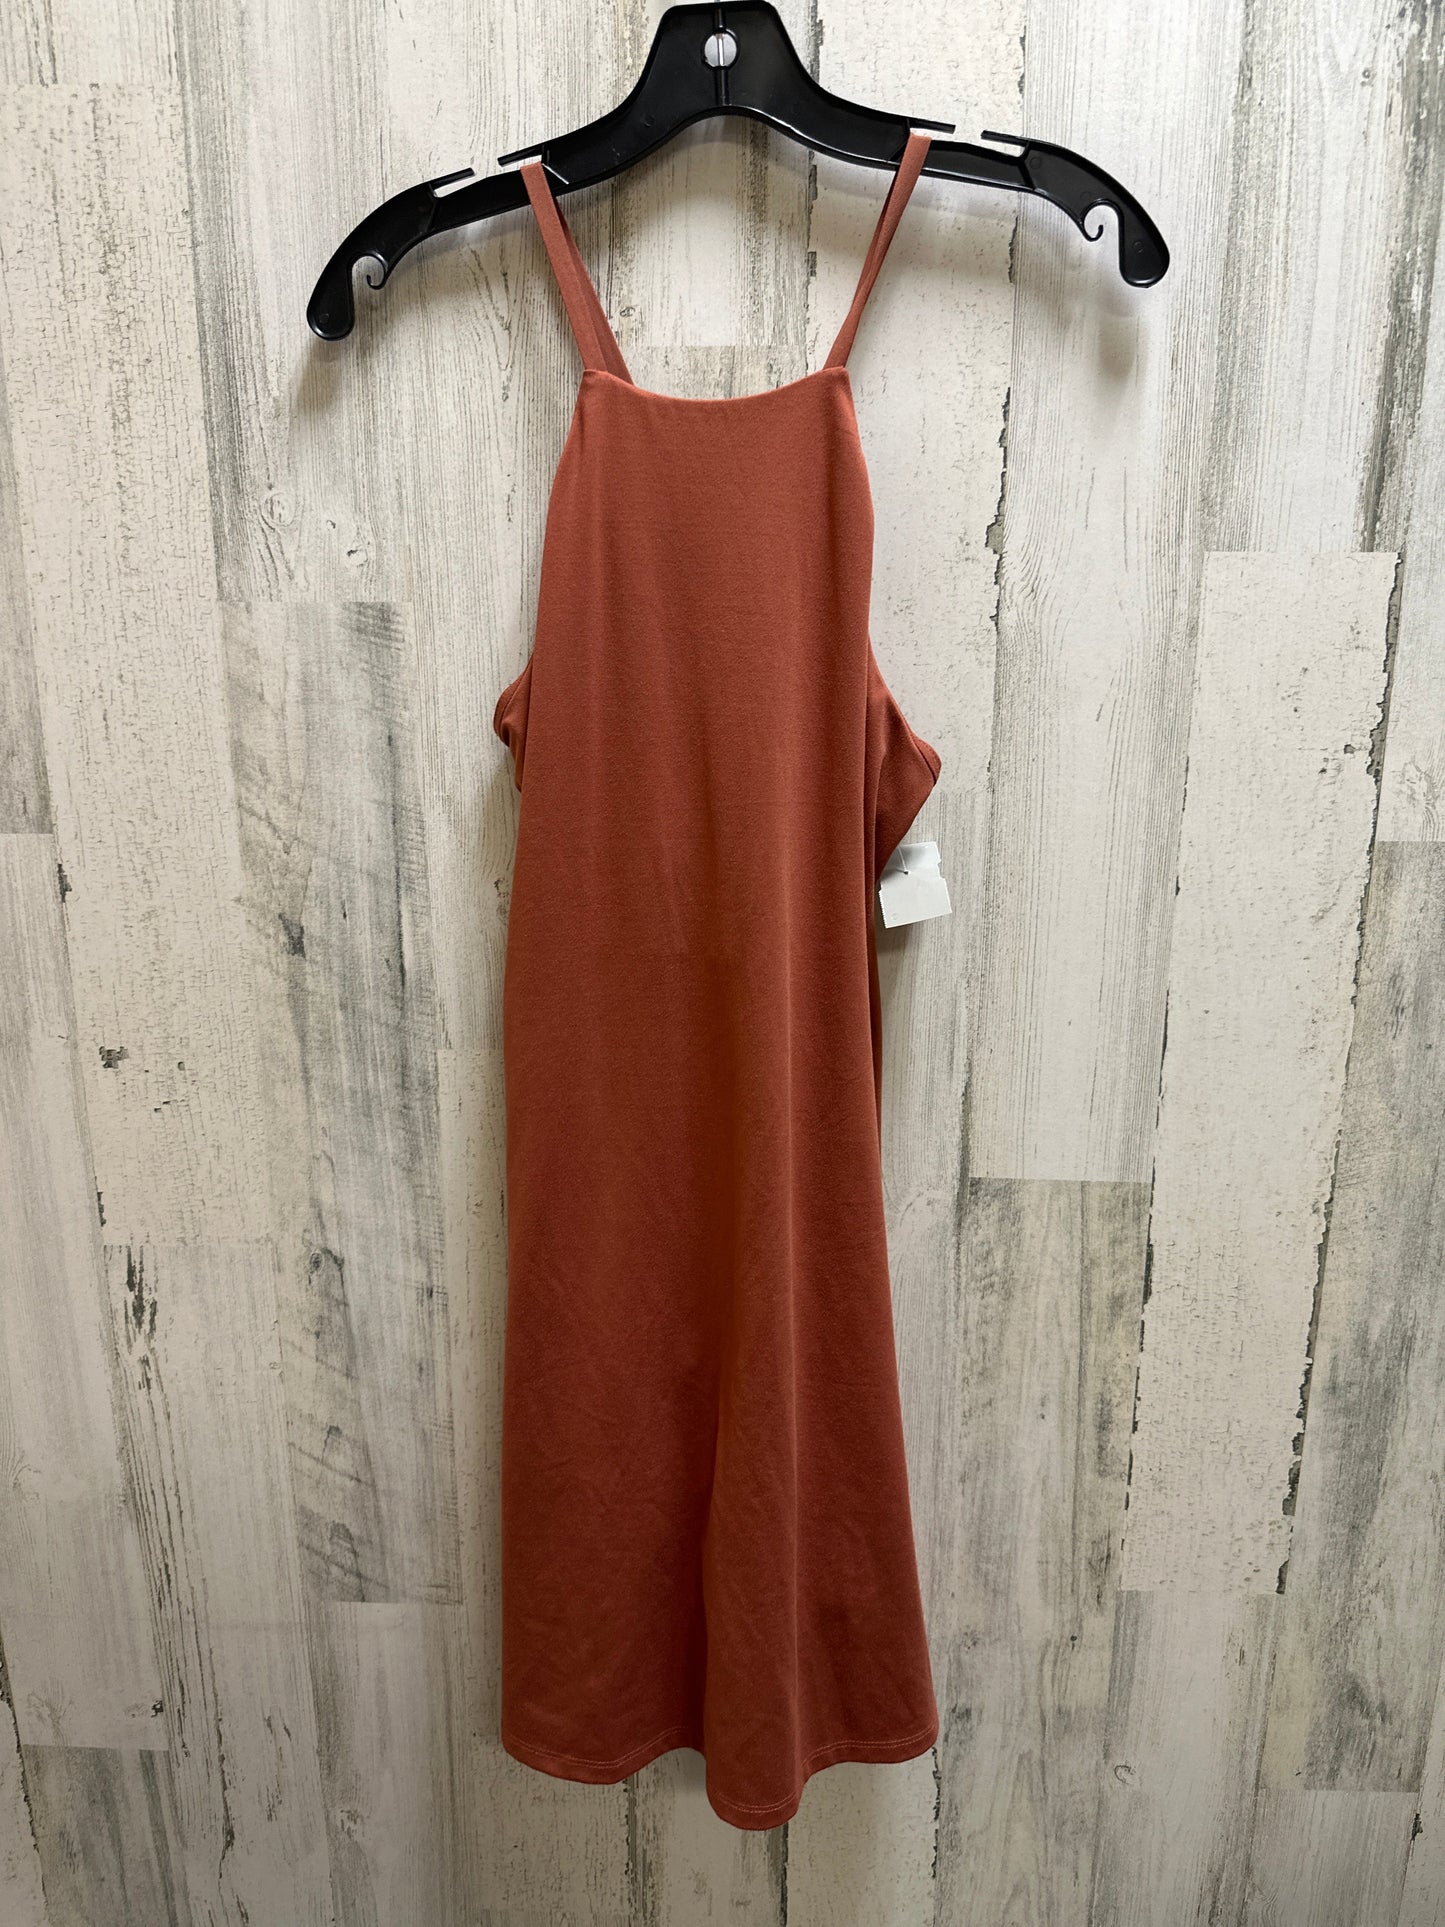 Brown Athletic Dress Madewell , Size S